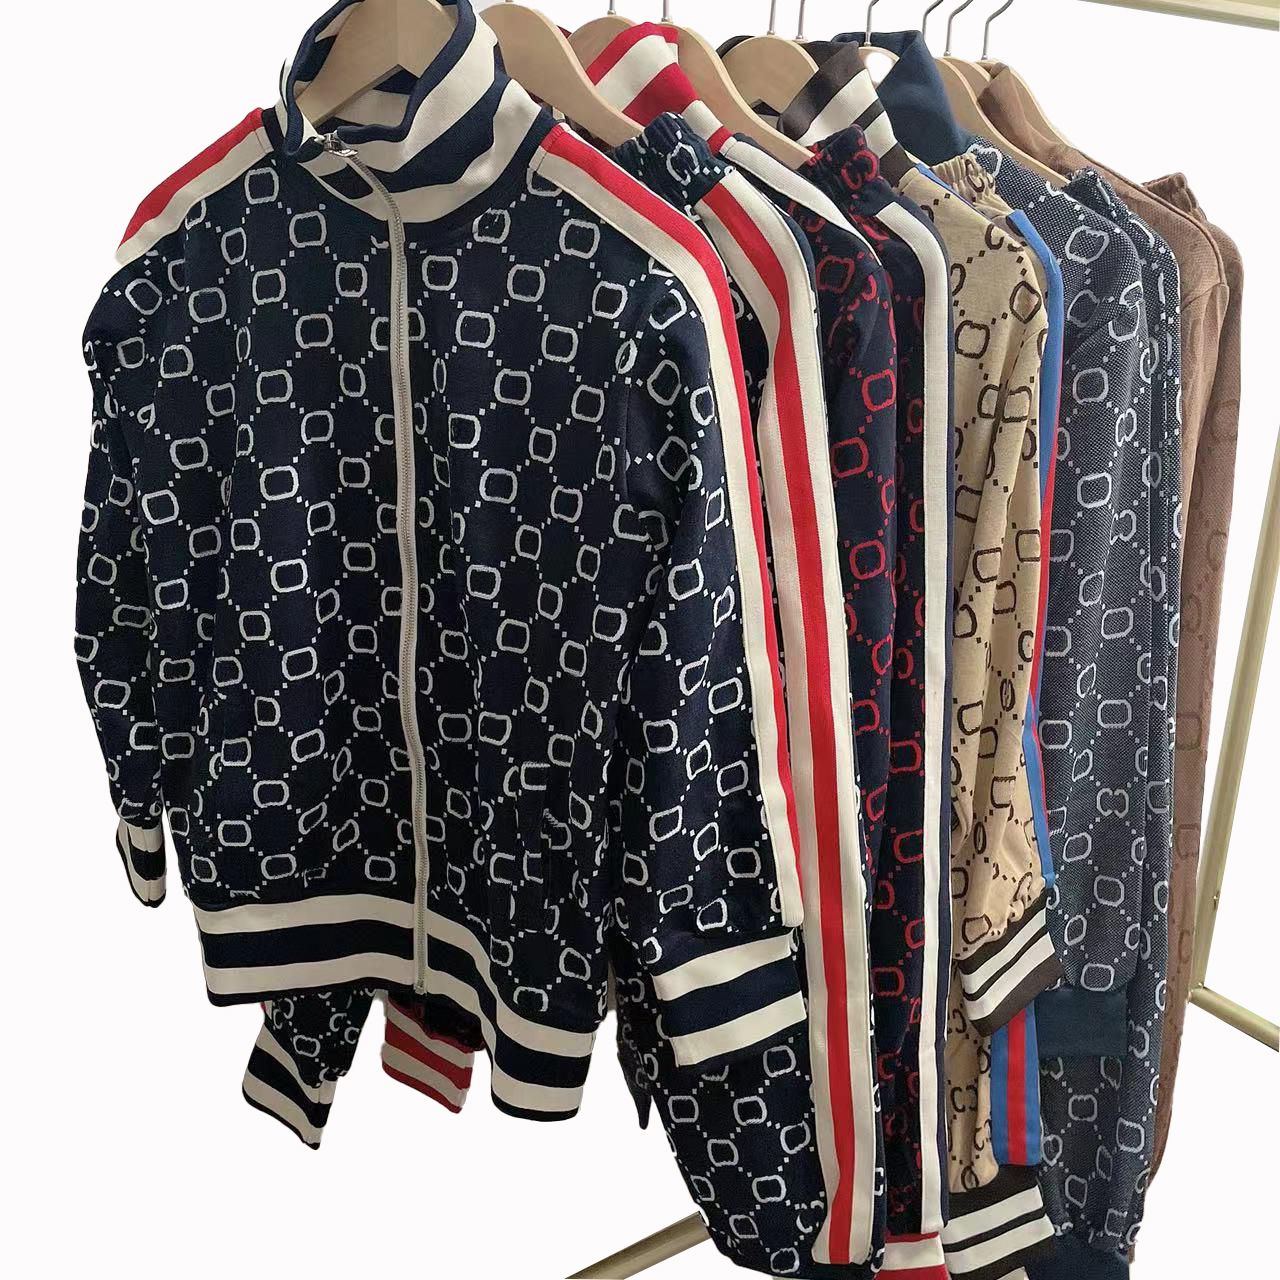 Where to get this gucci jacket on DHGATE??? ONLY JACKET!! : r/DHgate